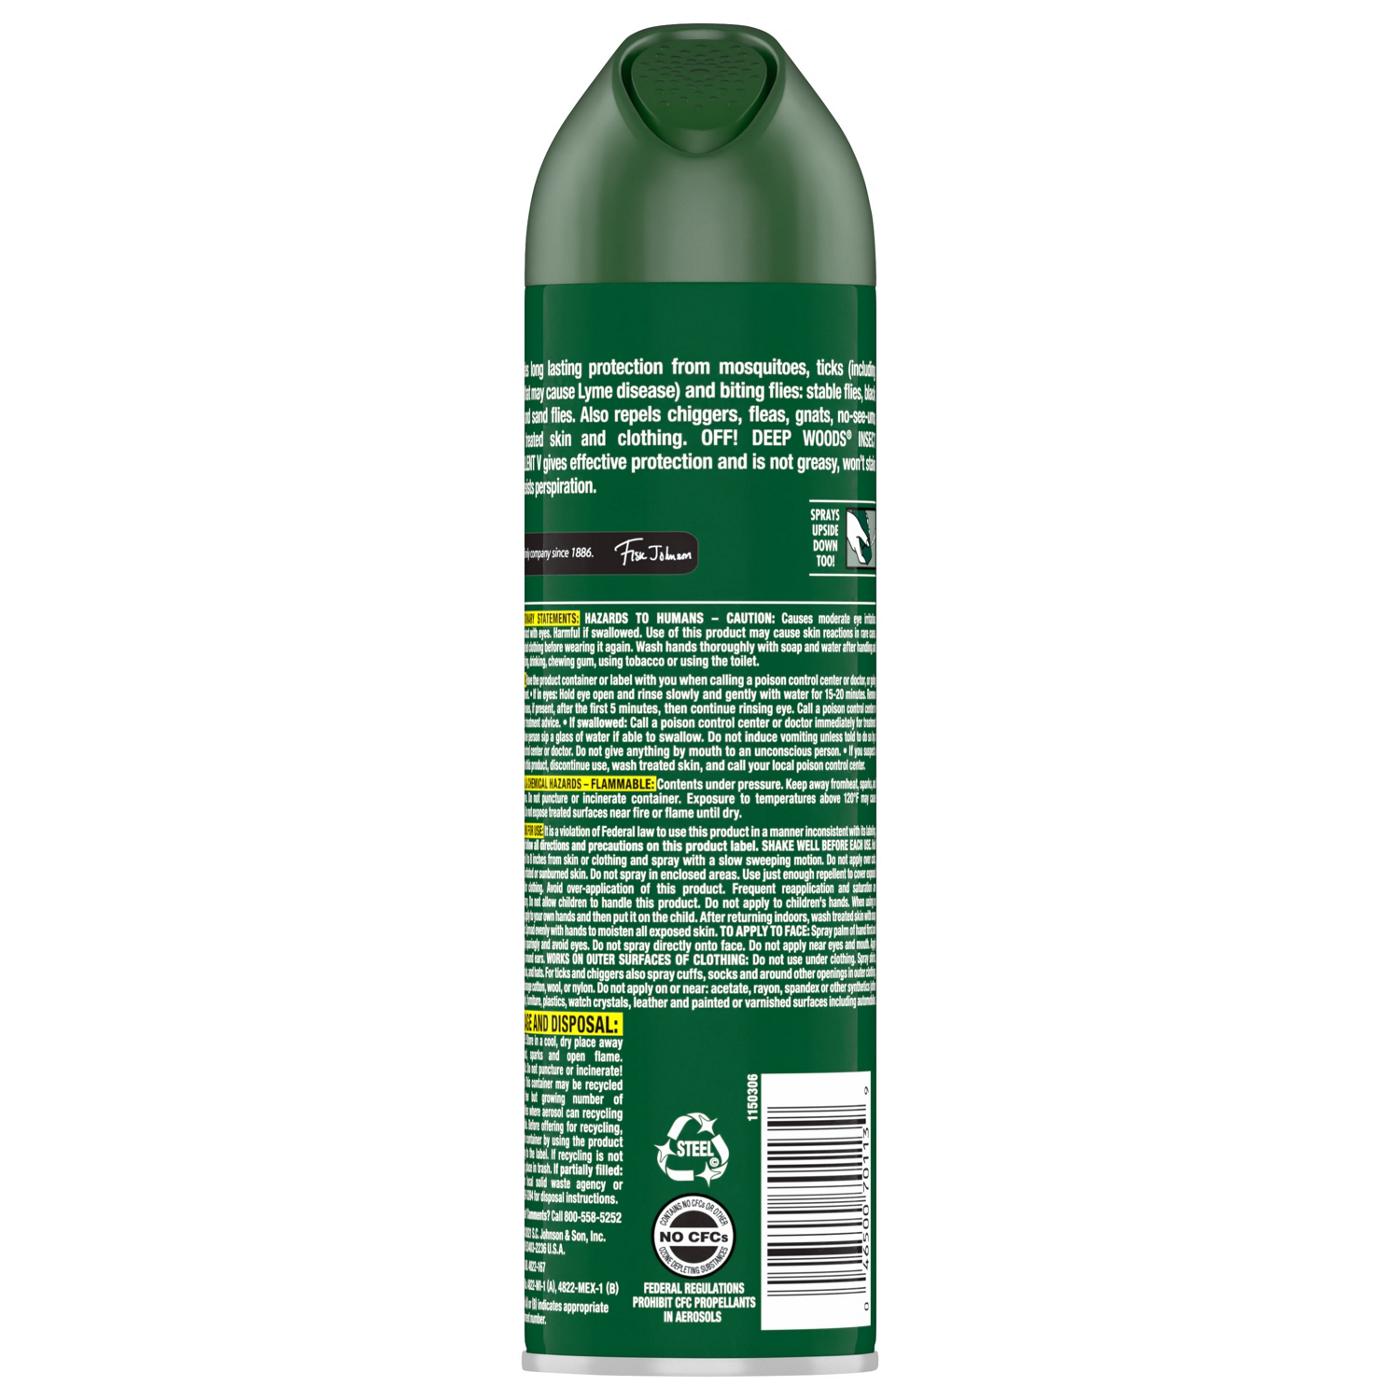 Off! Deep Woods Insect Repellant V; image 2 of 2